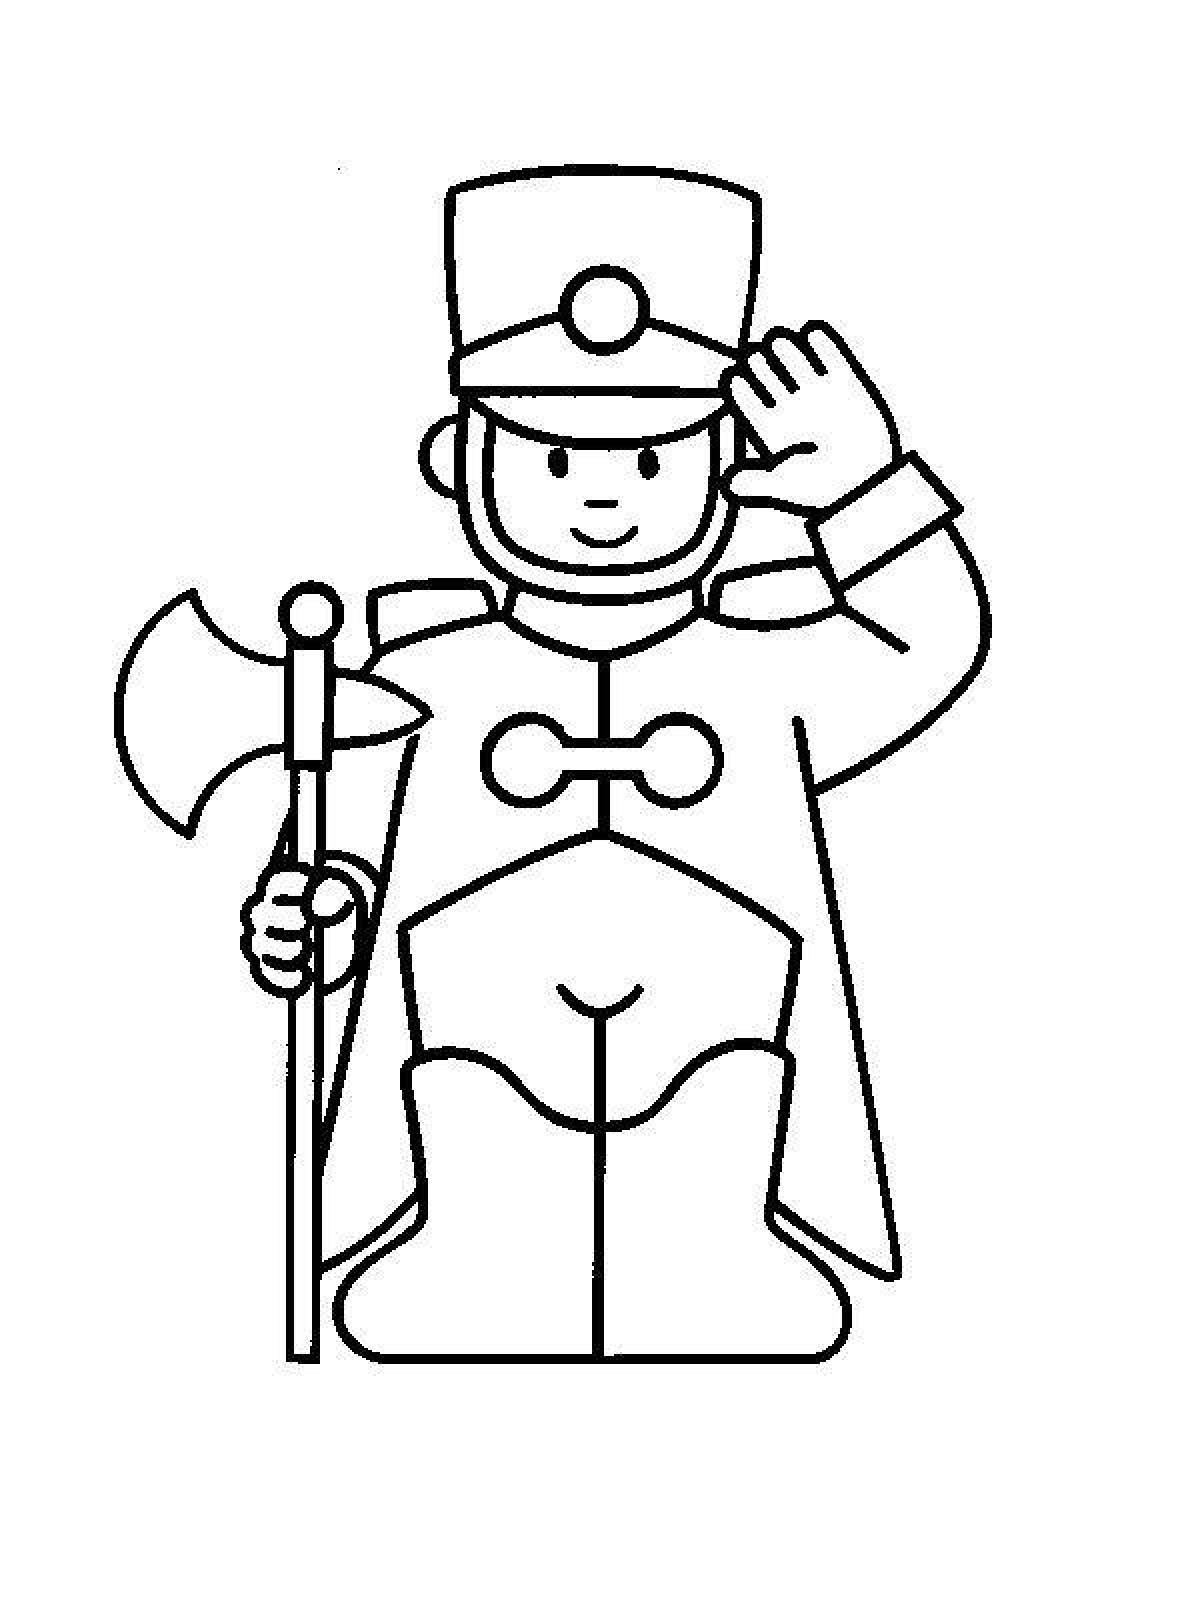 Impossible soldier coloring page